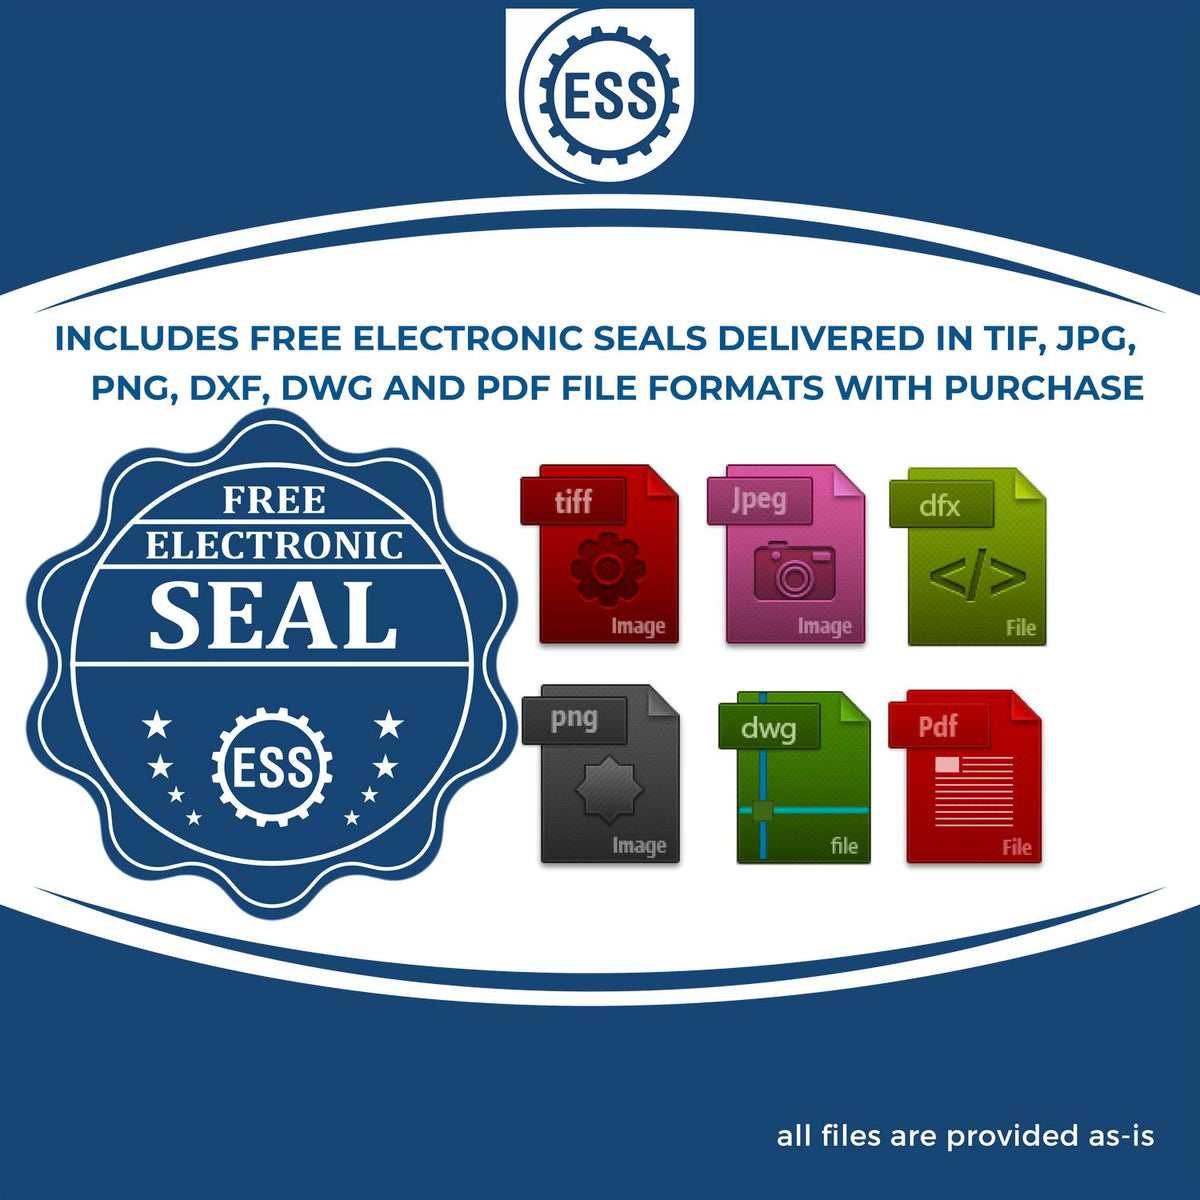 An infographic for the free electronic seal for the North Carolina Engineer Desk Seal illustrating the different file type icons such as DXF, DWG, TIF, JPG and PNG.